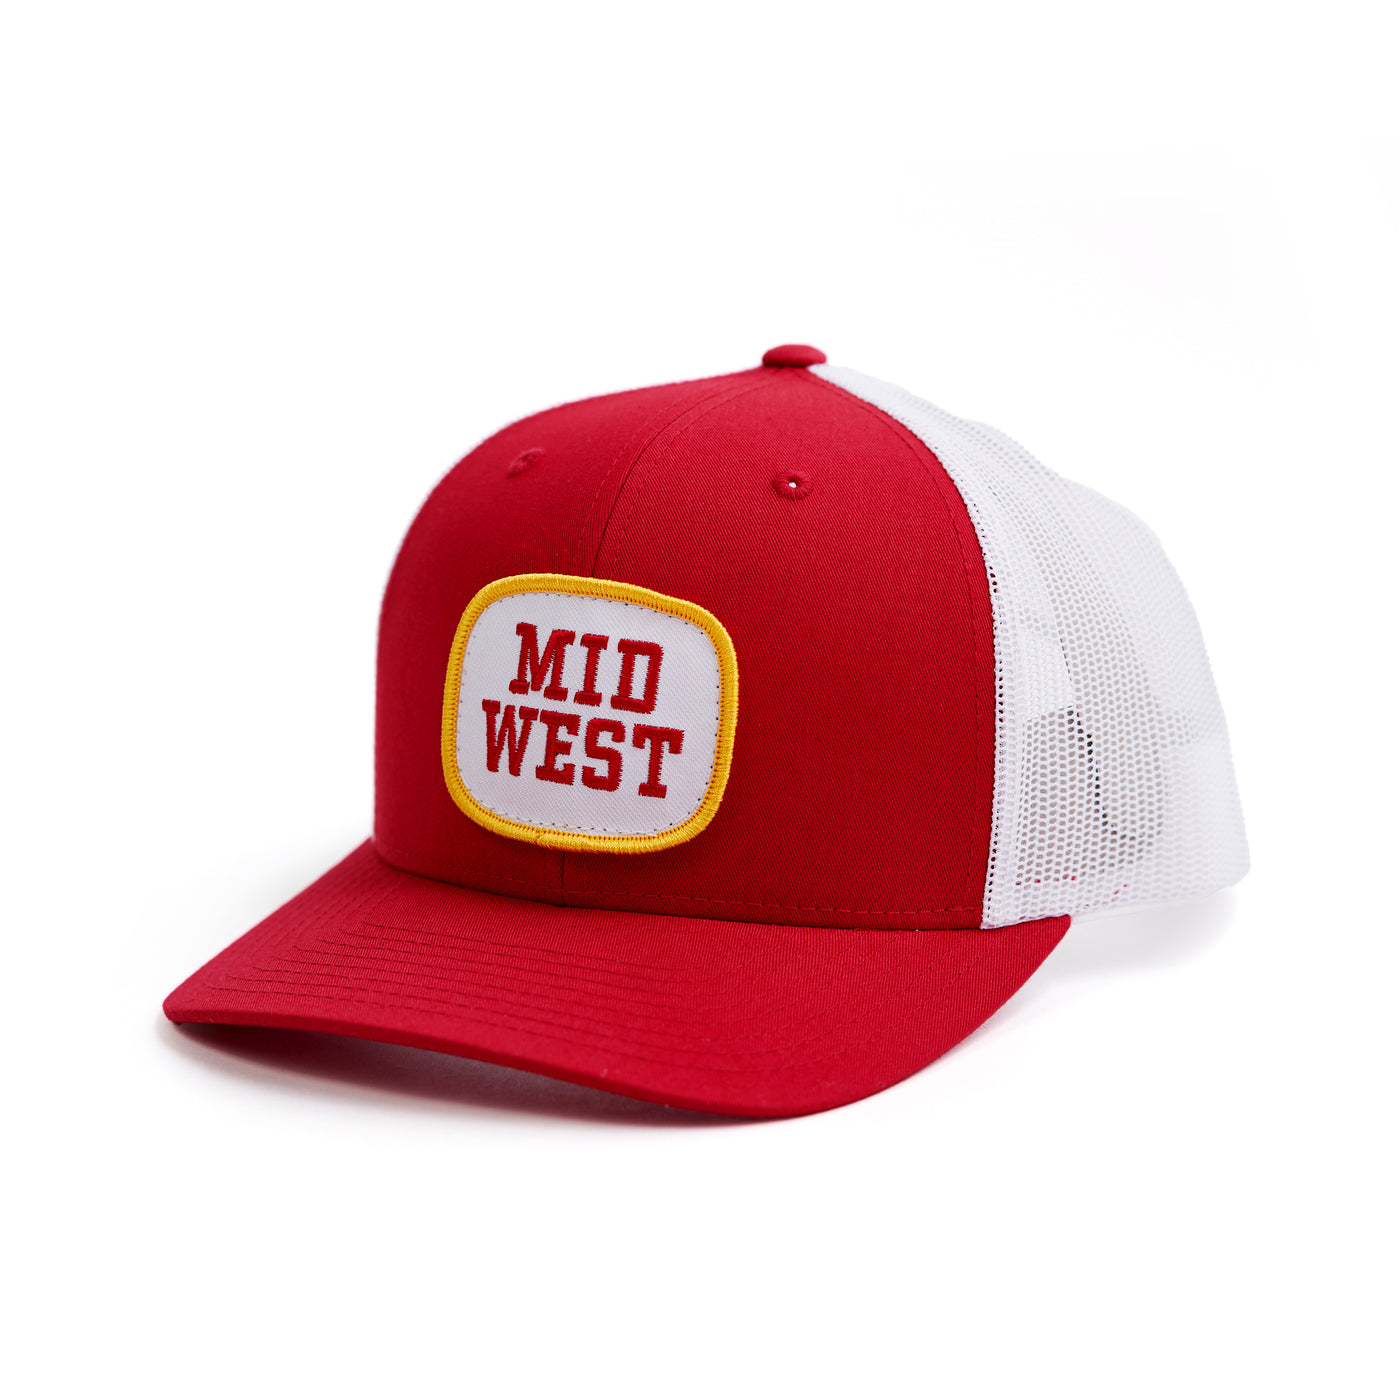 Midwest Red Trucker Hat